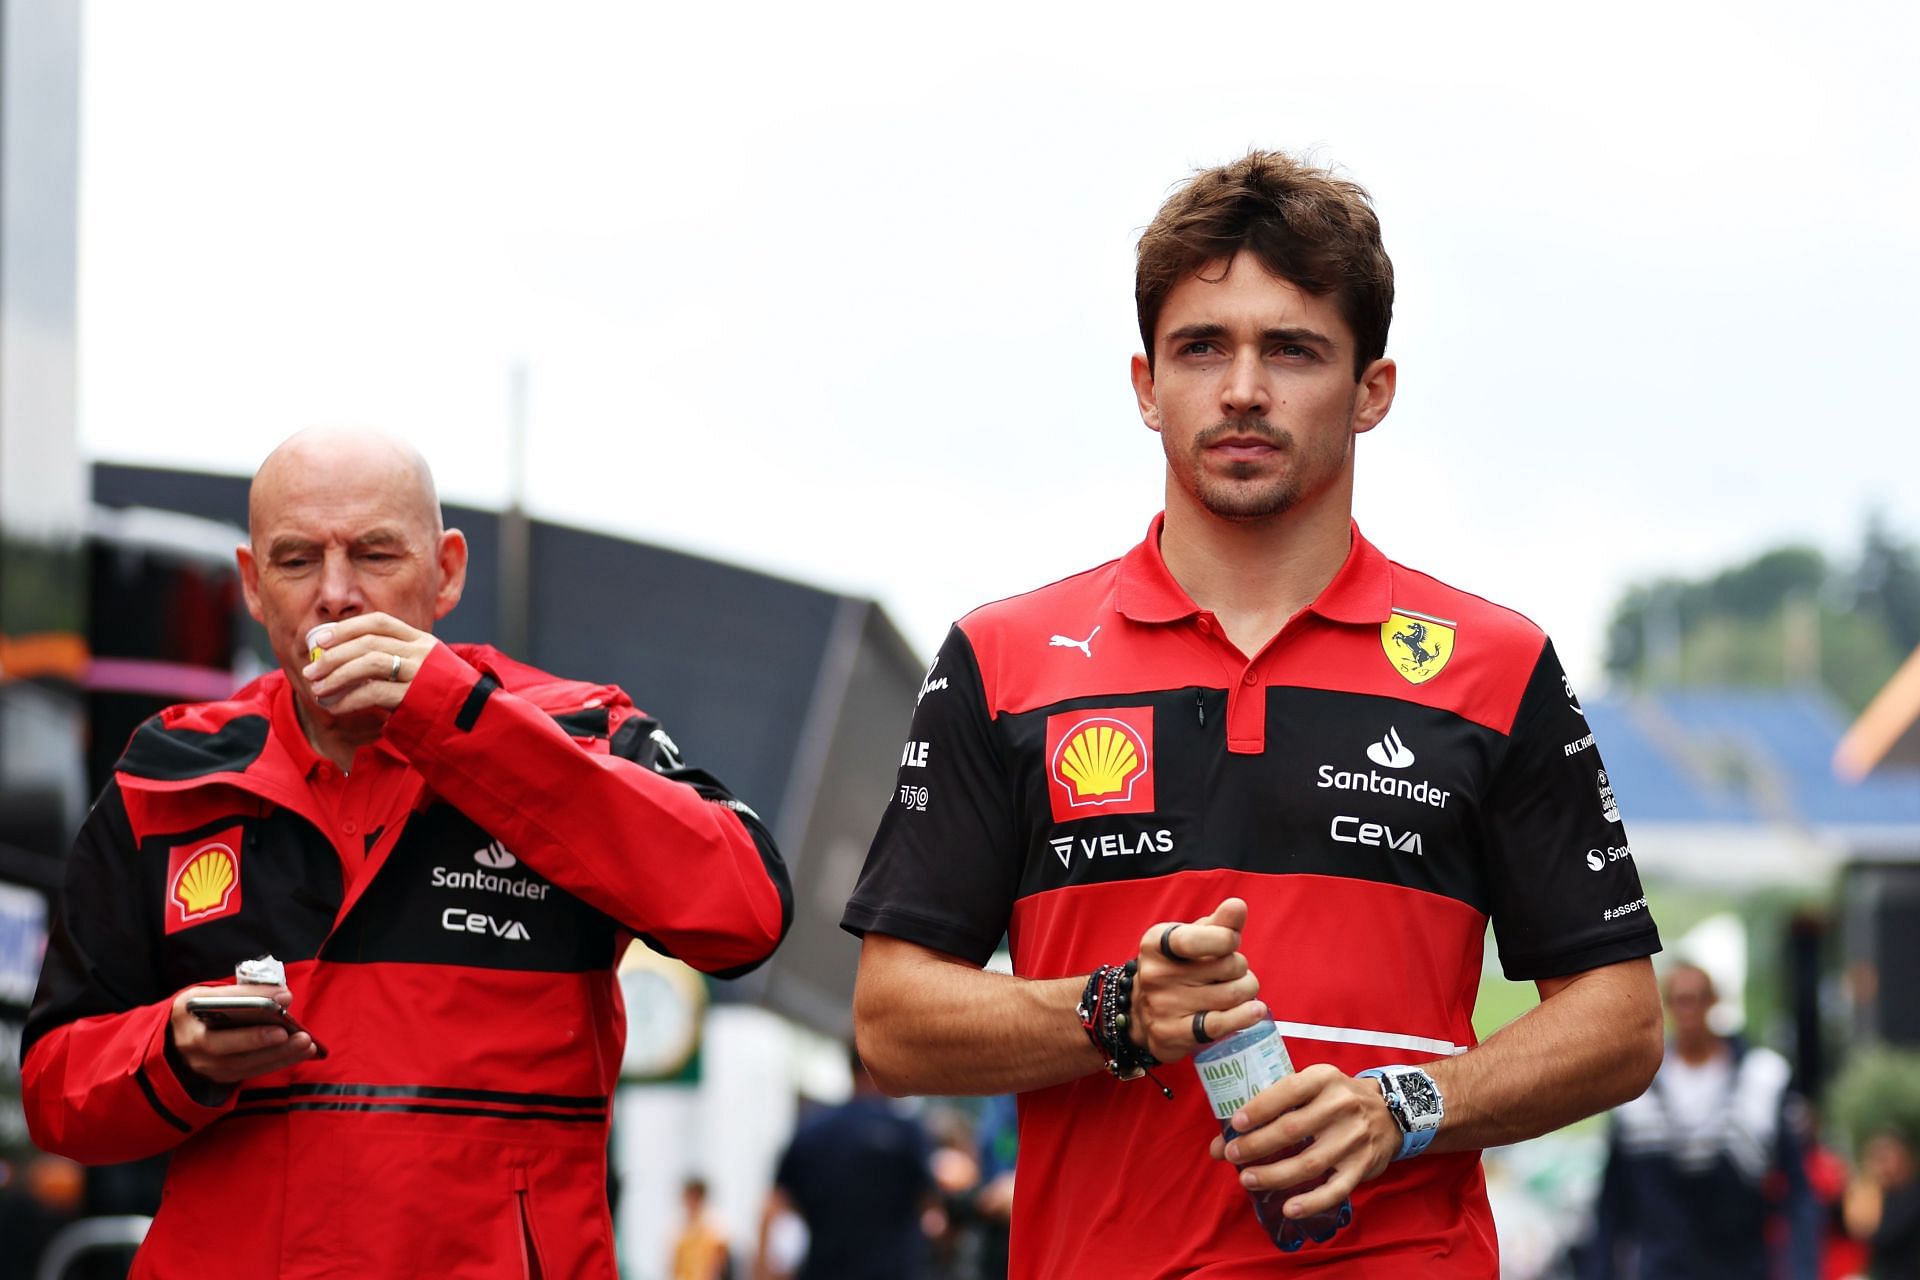 Will Charles Leclerc finally be able to break the run of bad results at the F1 Austrian GP?